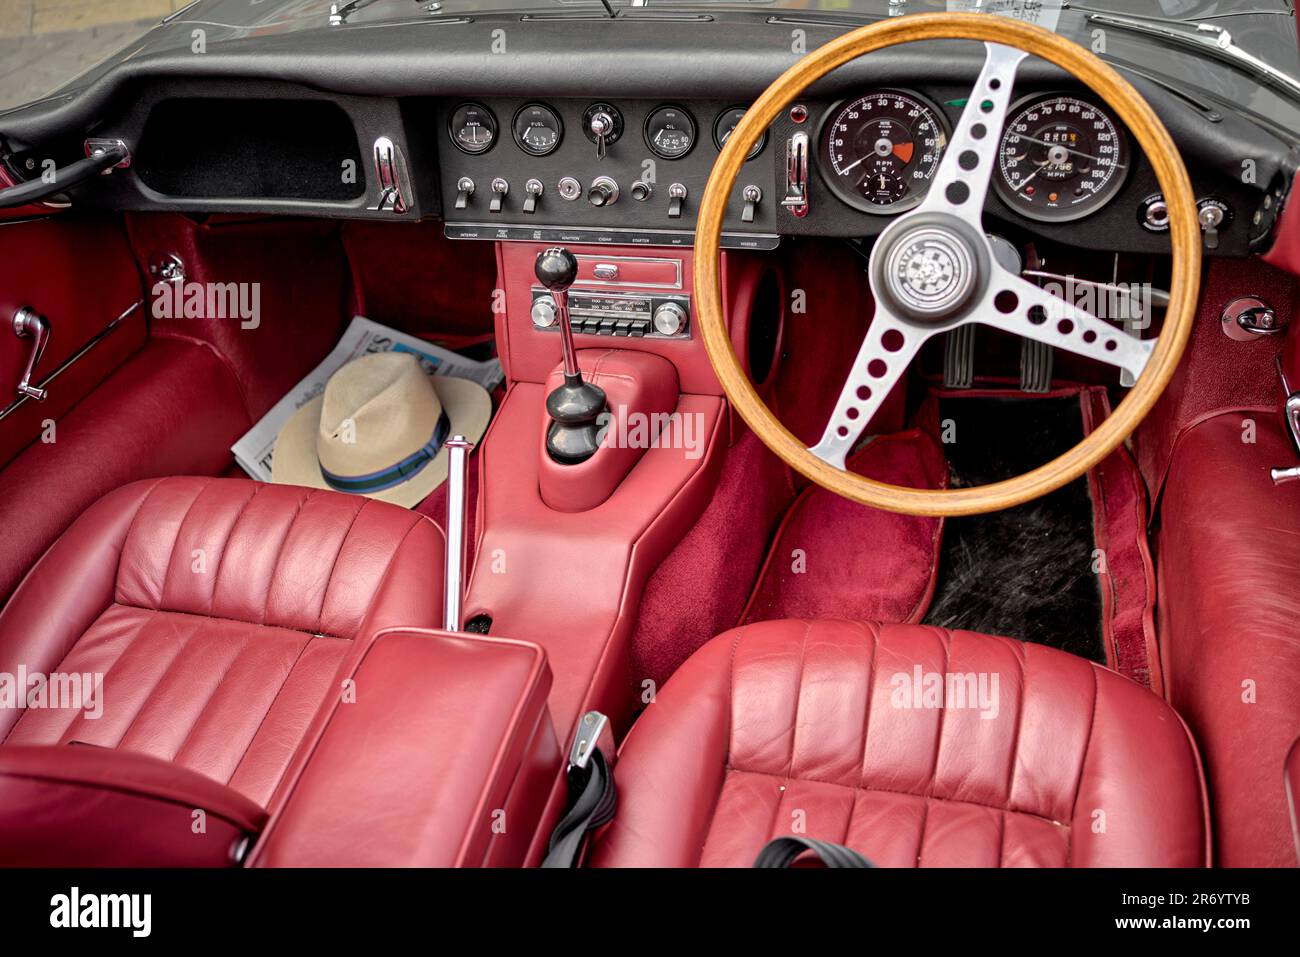 Jaguar E Type interior, red leather, 1965 4.2 litre convertible. Iconic English sports car. Stock Photo